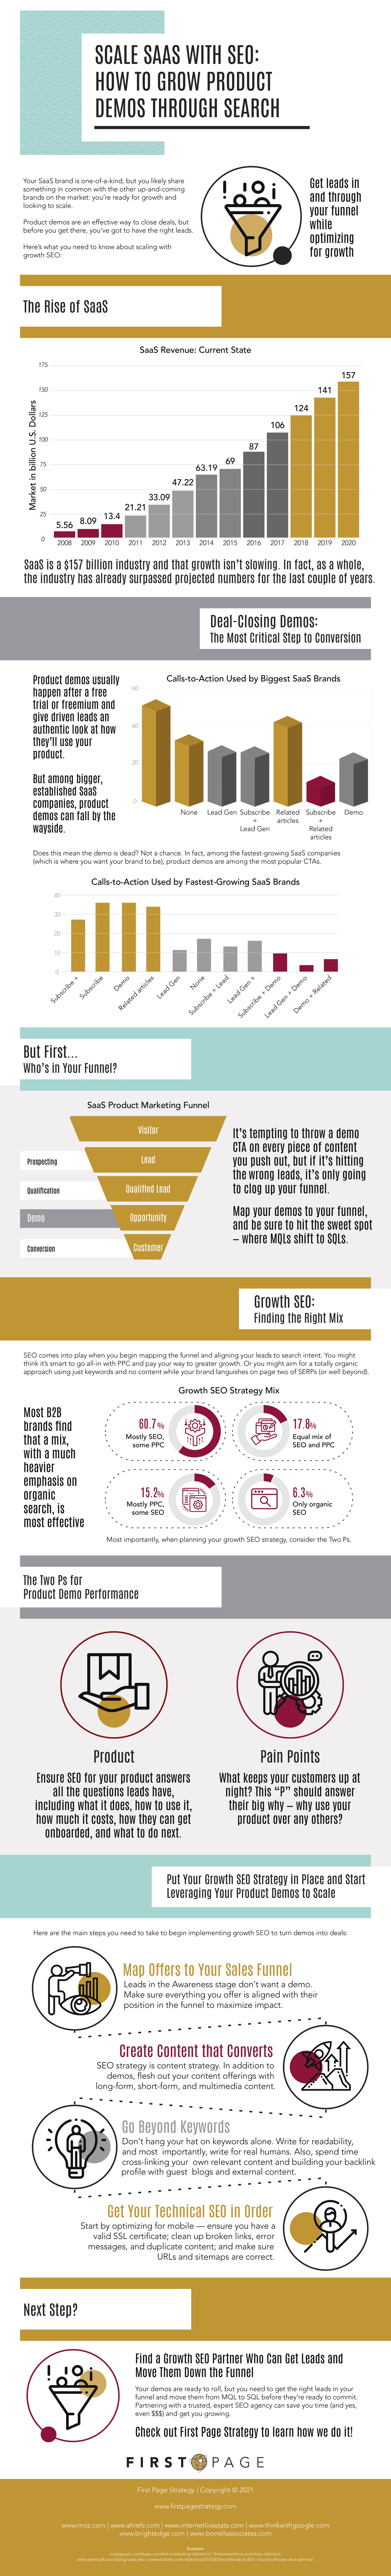 How to Use Growth SEO to Grow Product Demos for Your SaaS Platform [INFOGRAPHIC}